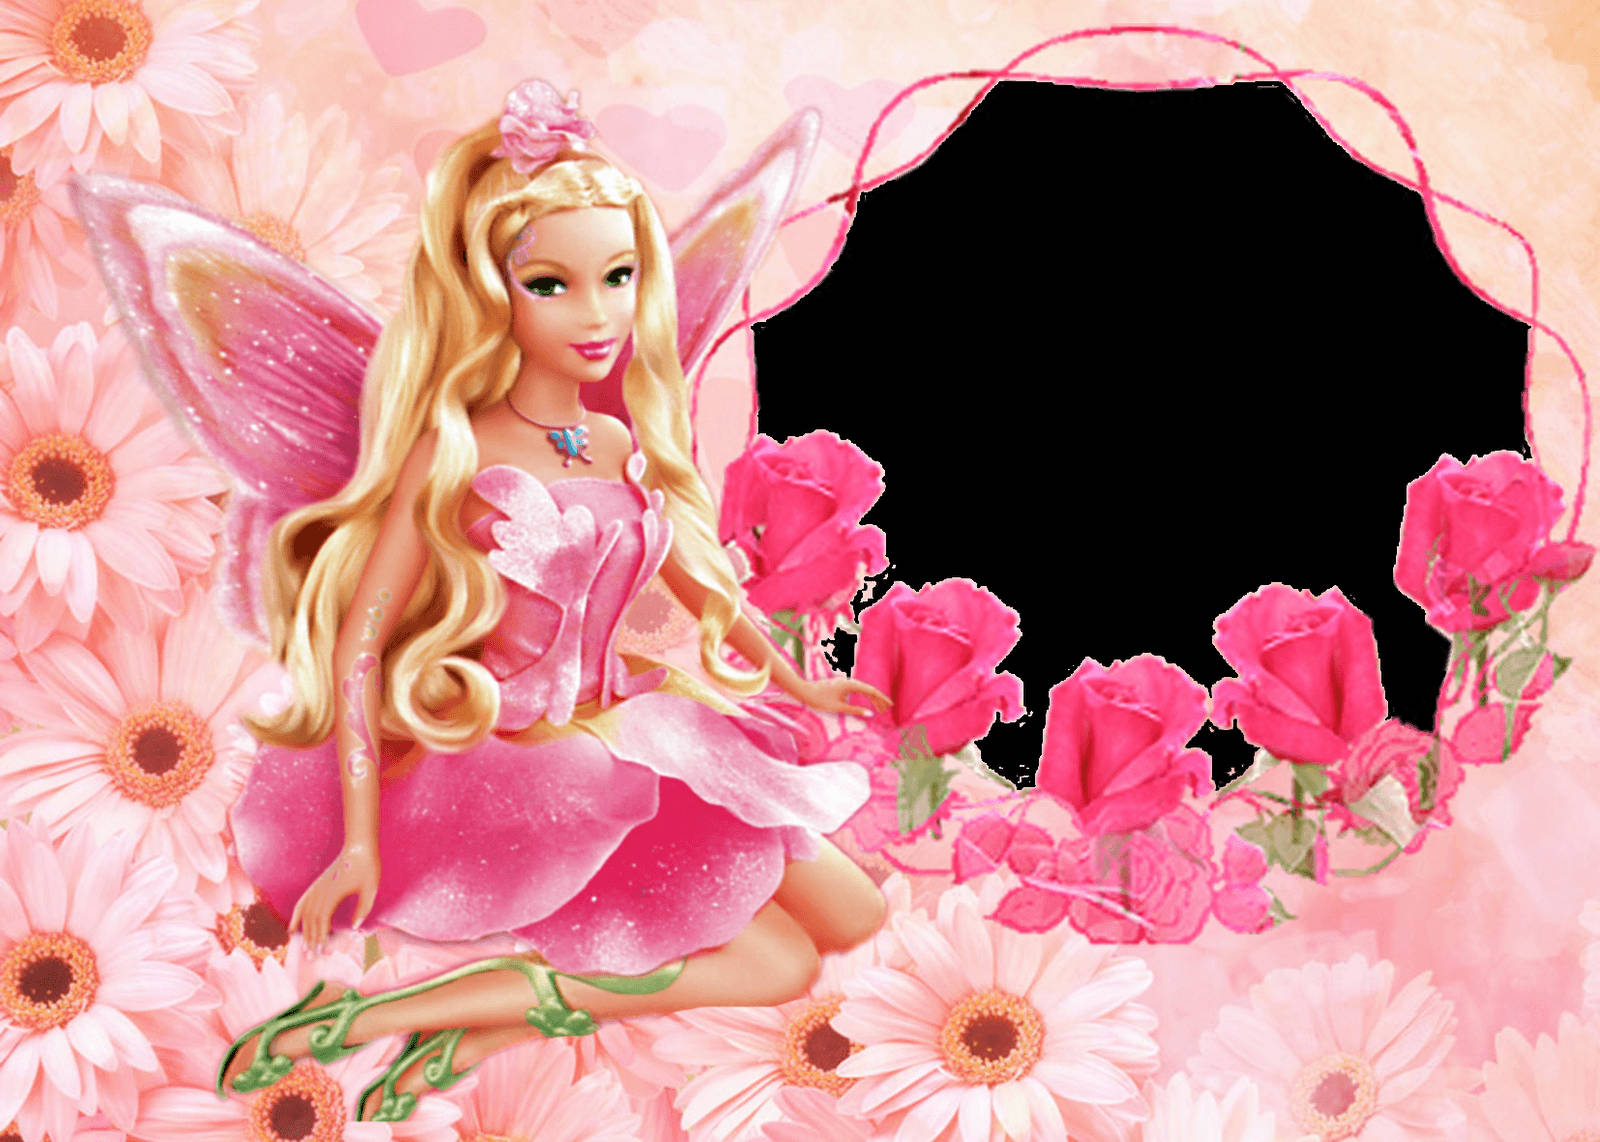 Free Barbie Wallpaper Downloads, [100+] Barbie Wallpapers for FREE |  